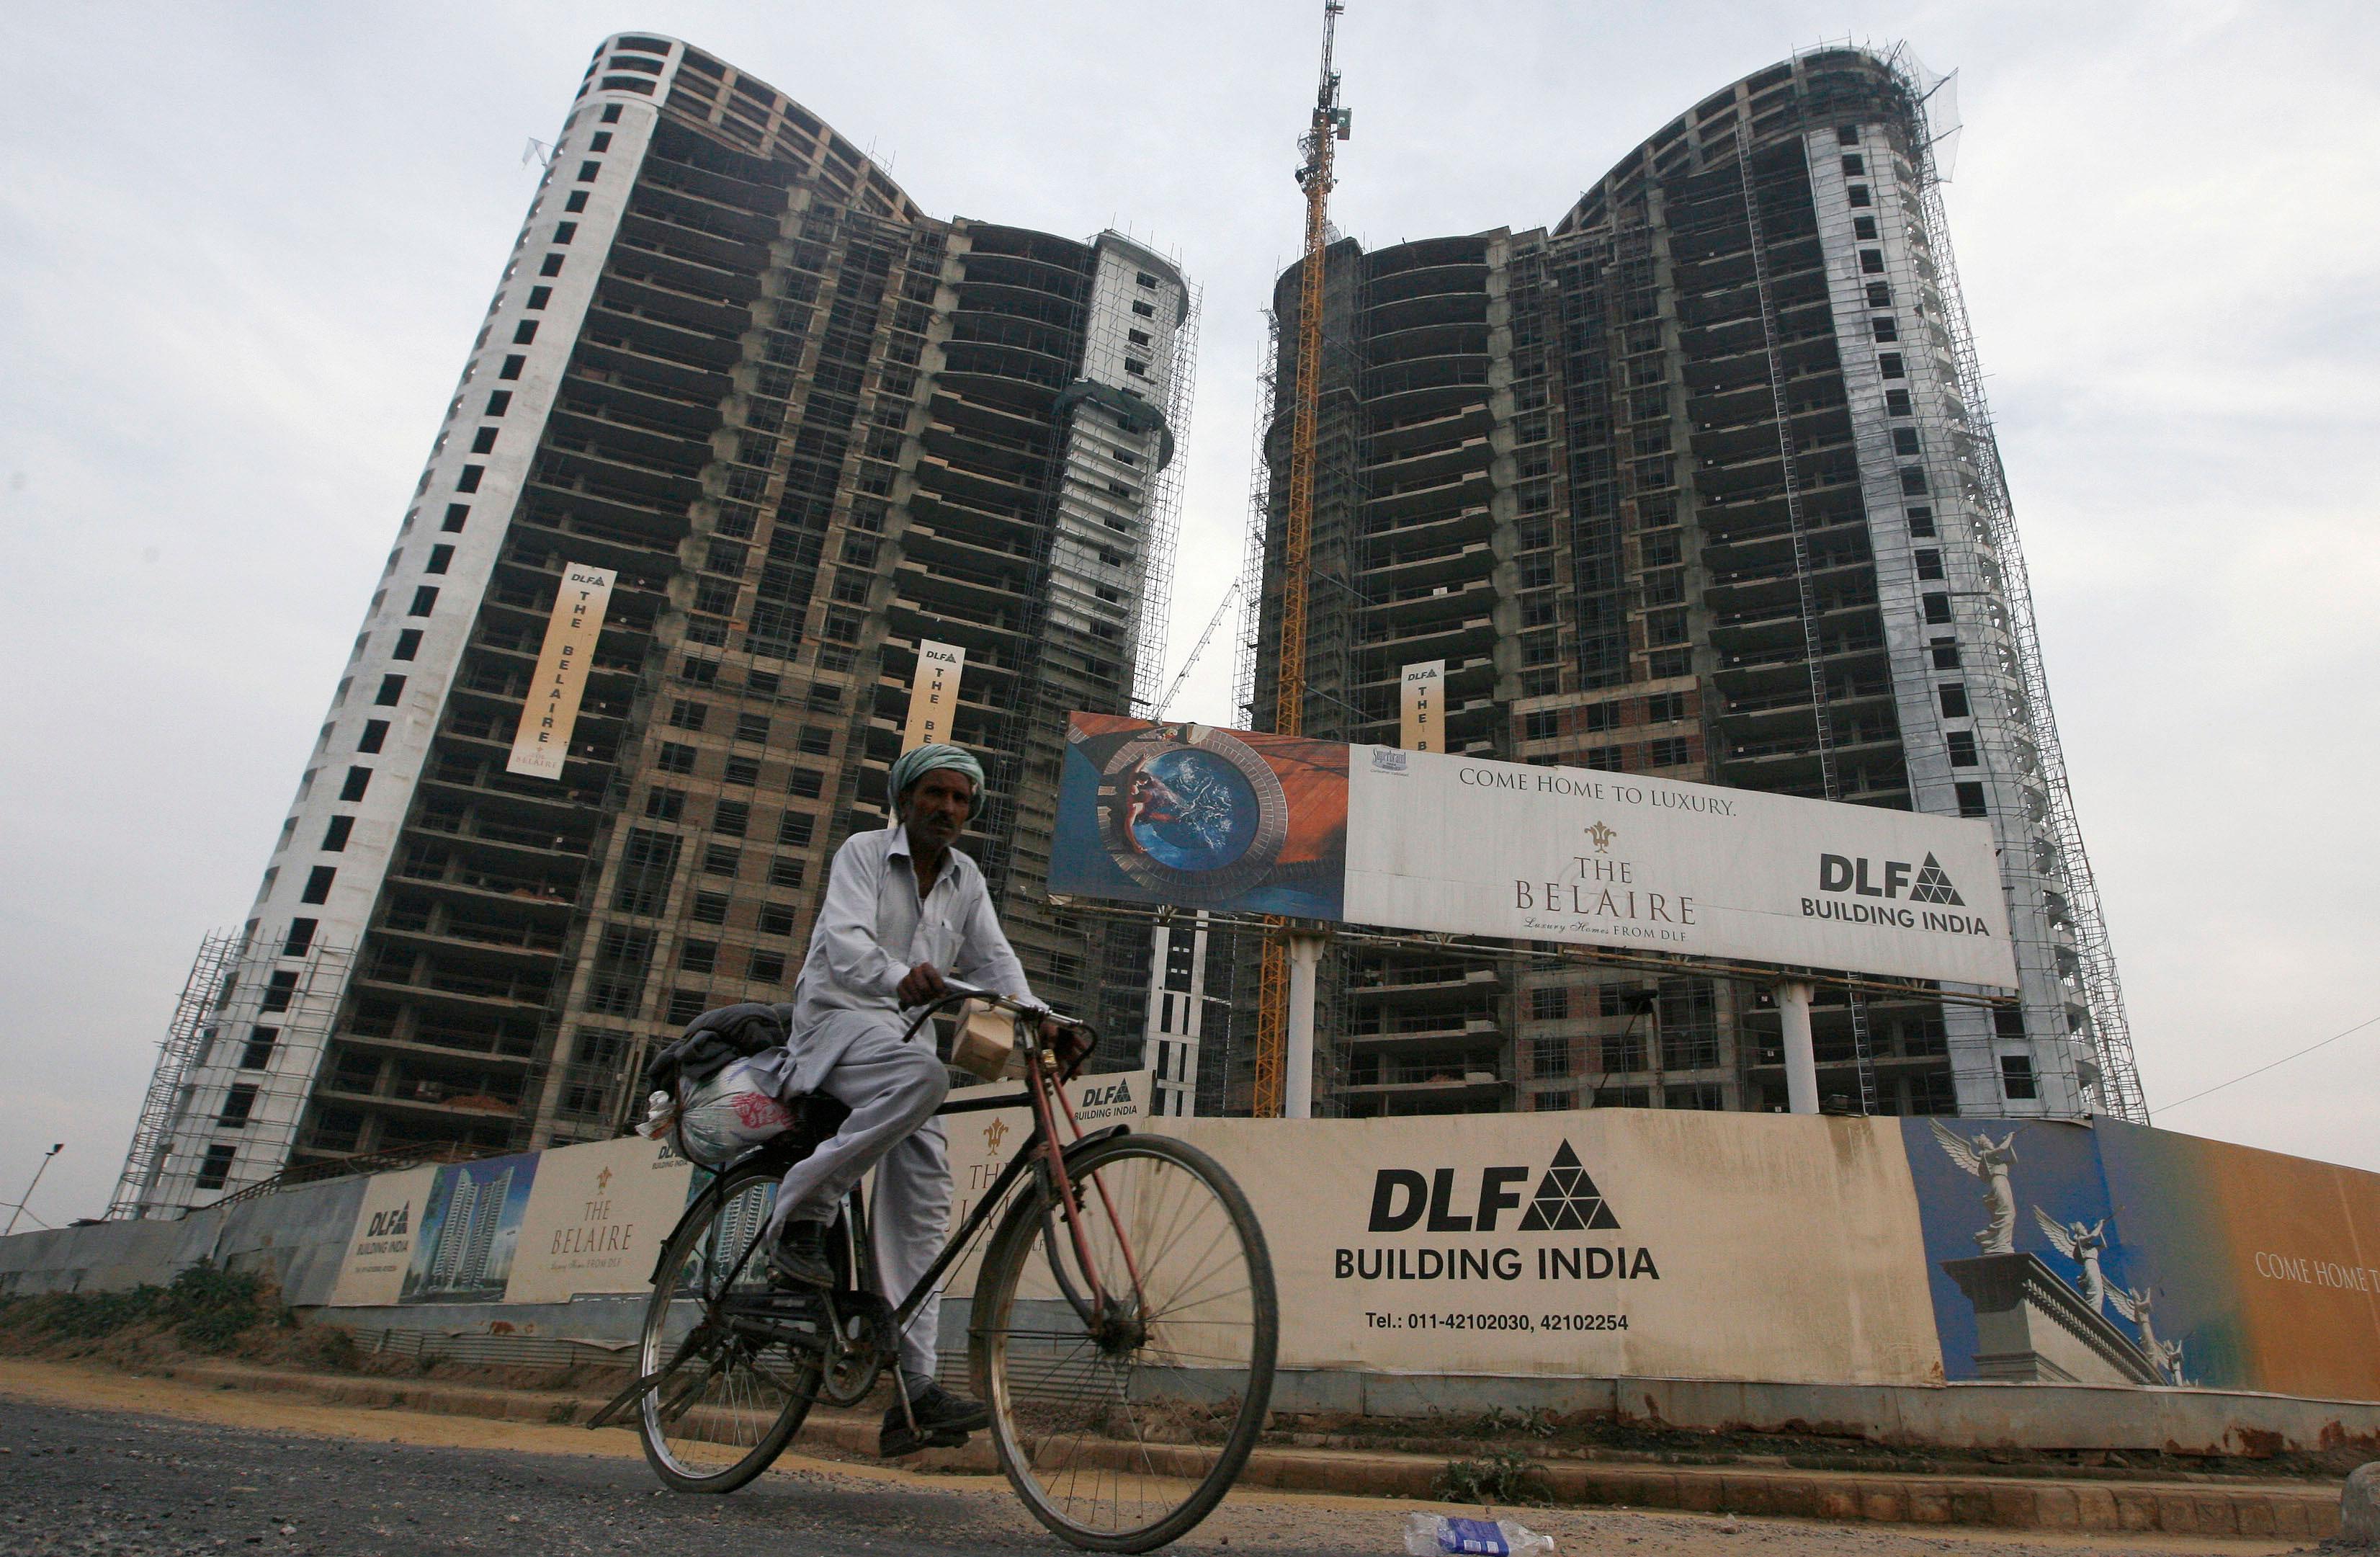 DLF shares soar on Q1 revenue growth even as profit shrinks on higher interest cost